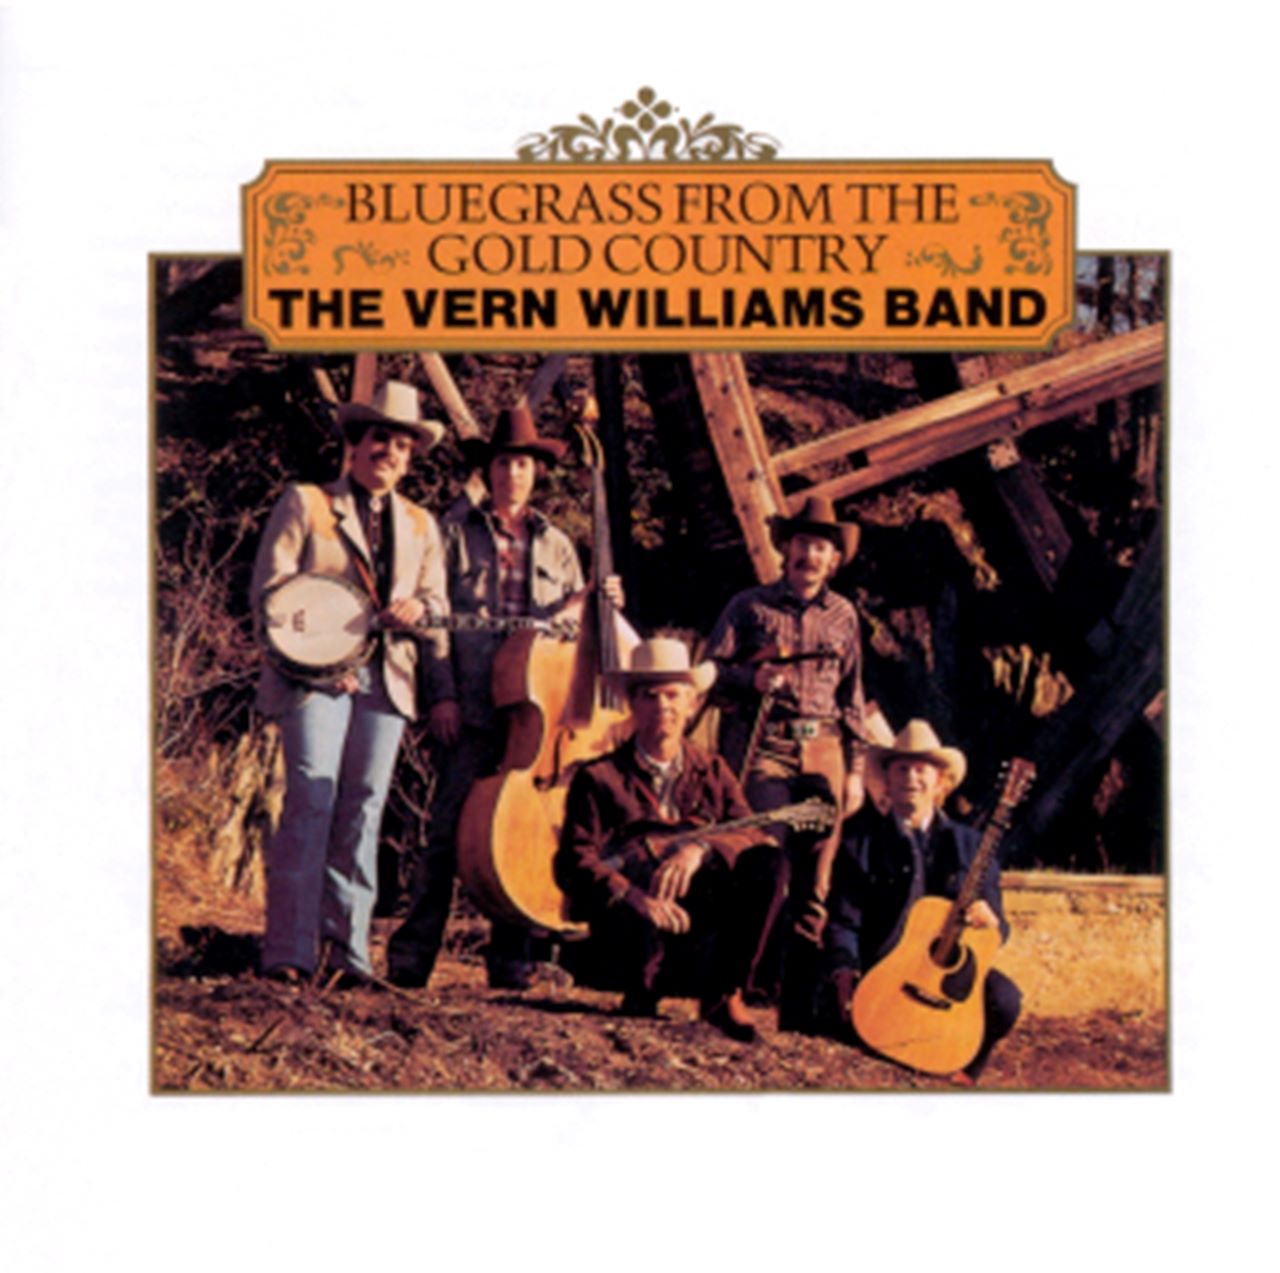 Vern Williams Band - Bluegrass From The Gold Country cover album